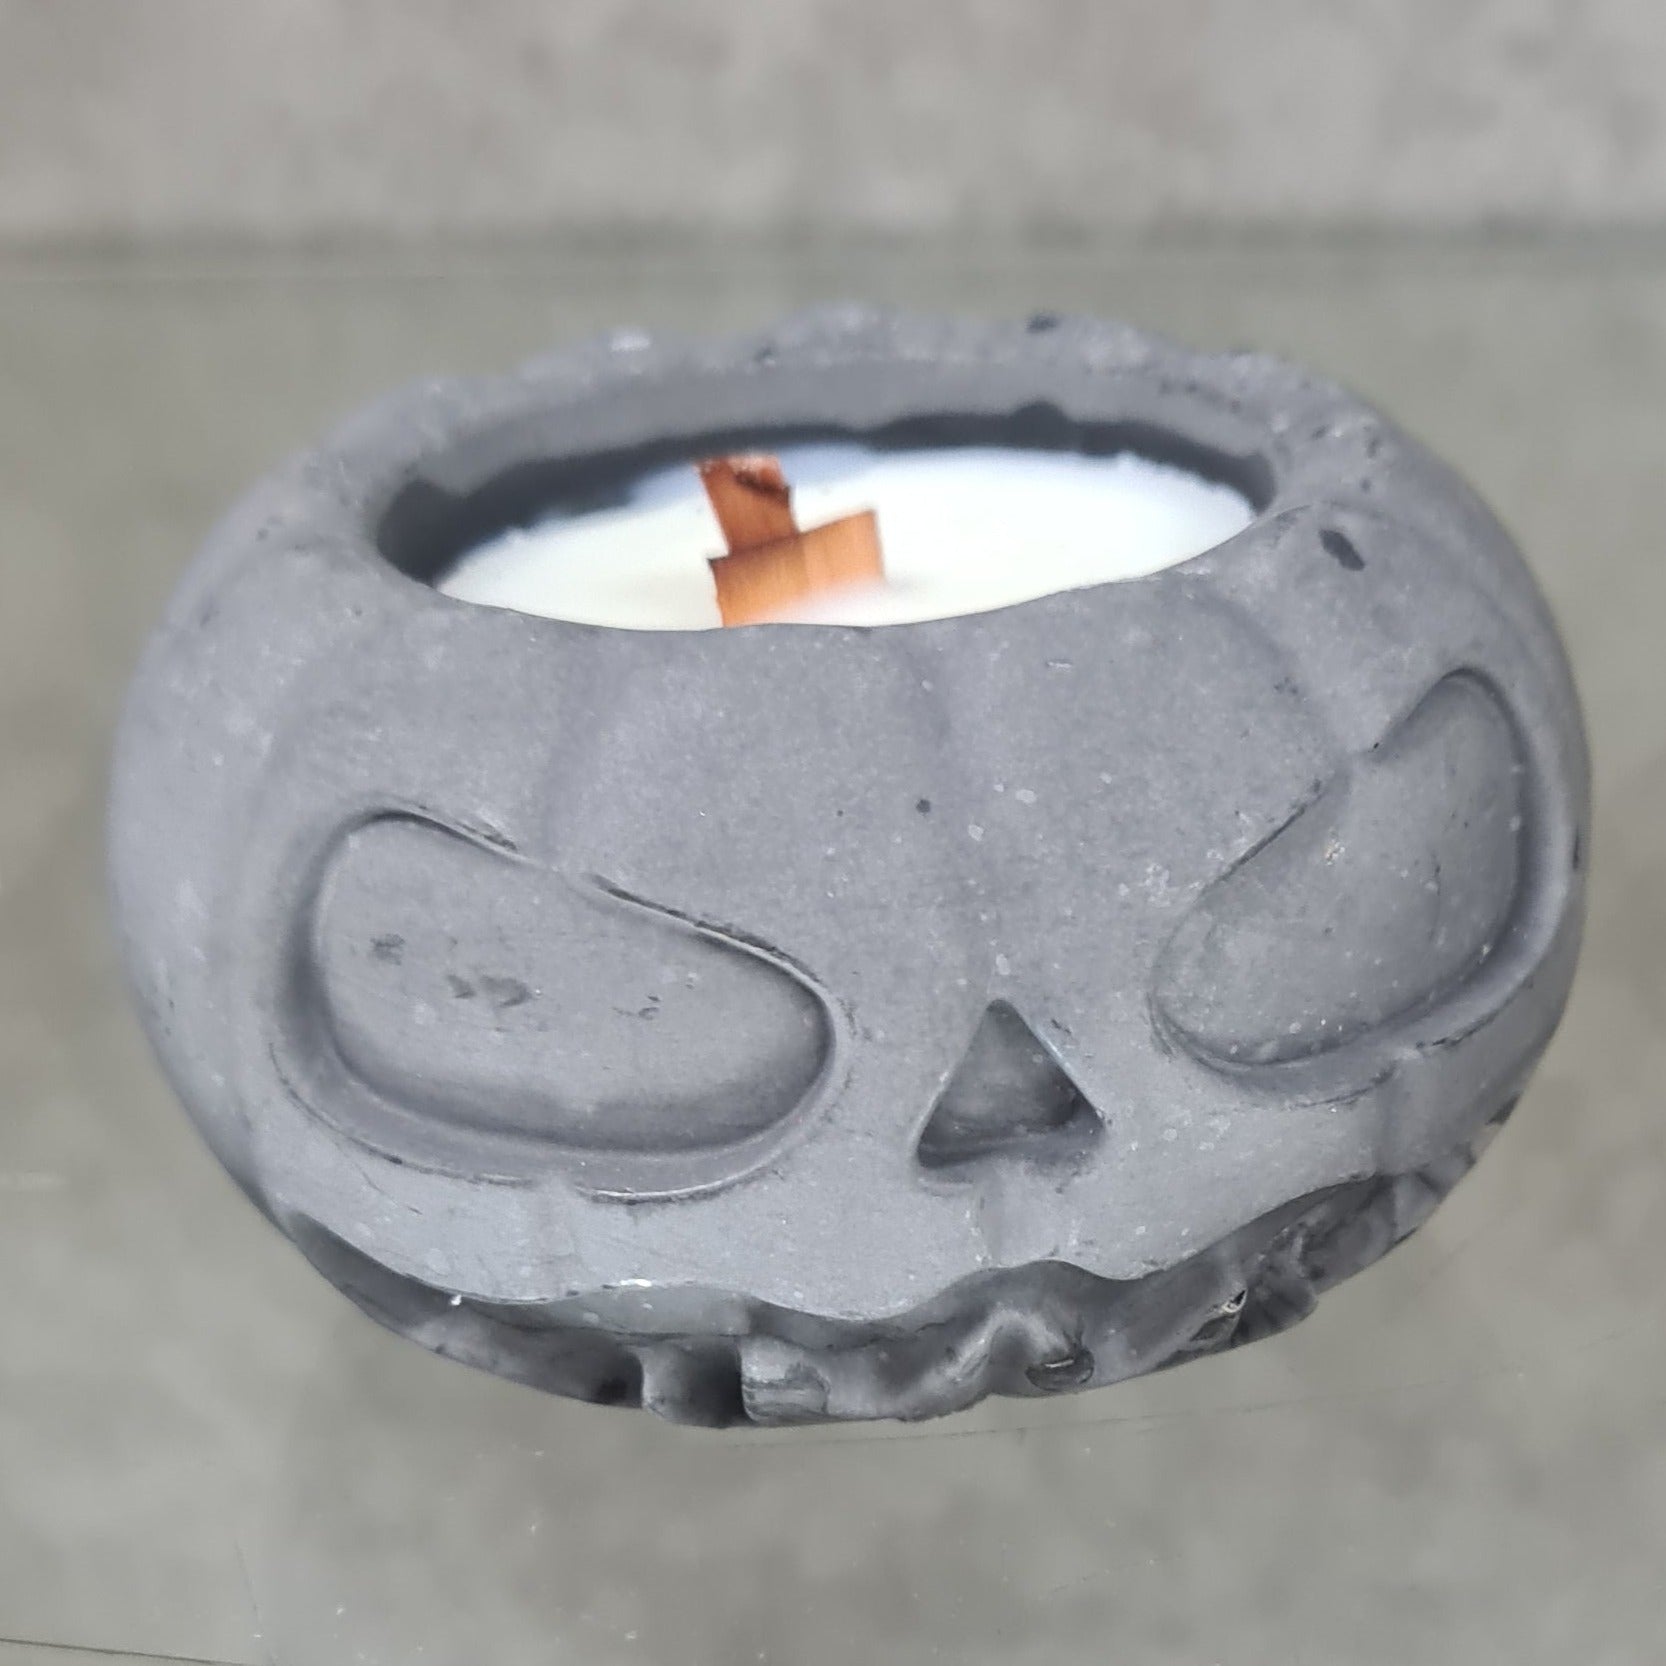 Harvest Bliss Scented Pumpkin Candle with enchanting autumn aroma, eco-friendly natural wax, and festive Halloween design.